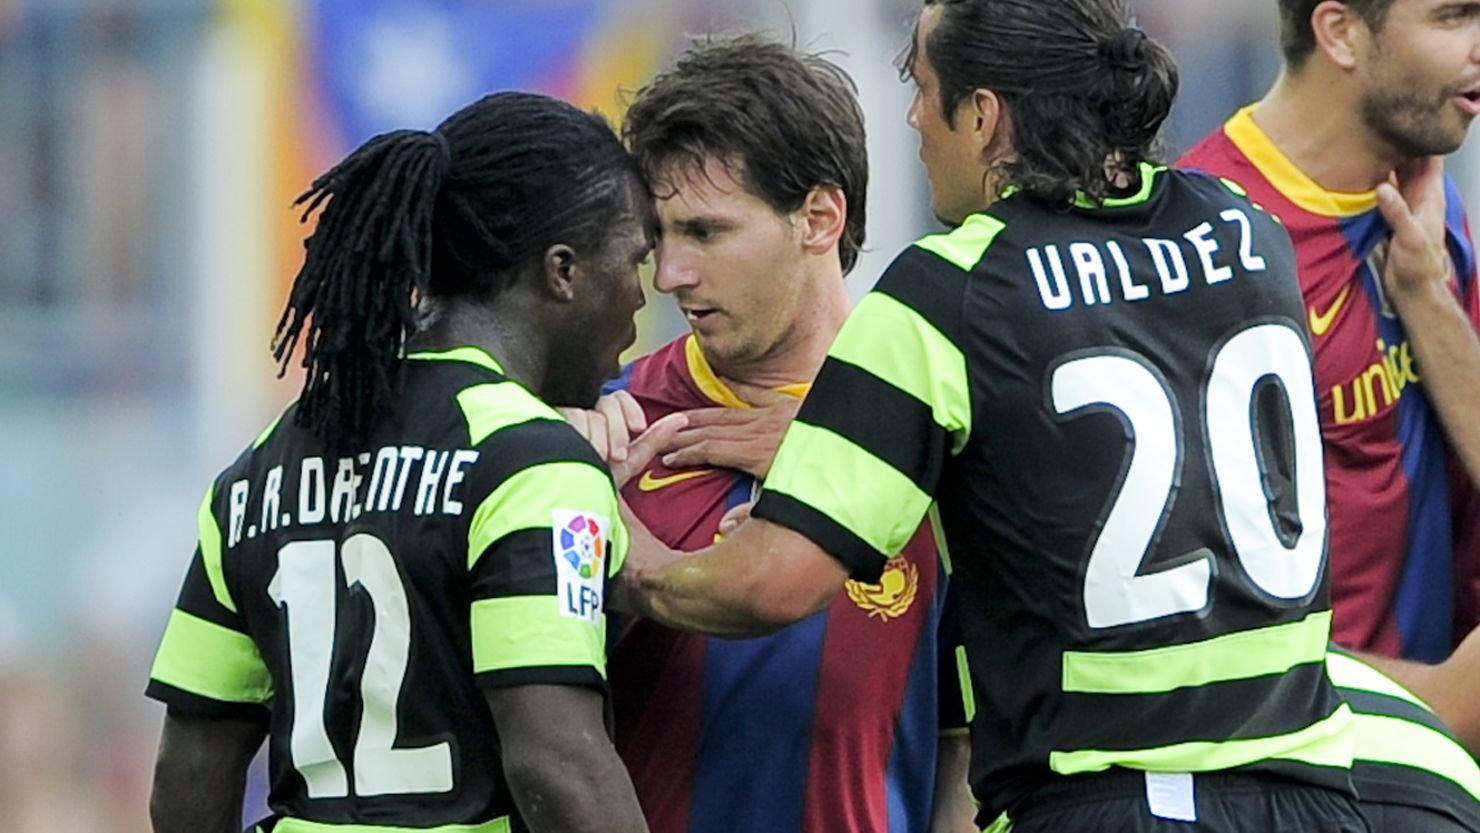 Royston Drenthe clashed with Lionel Messi while playing for Hercules against Barcelona in 2010.